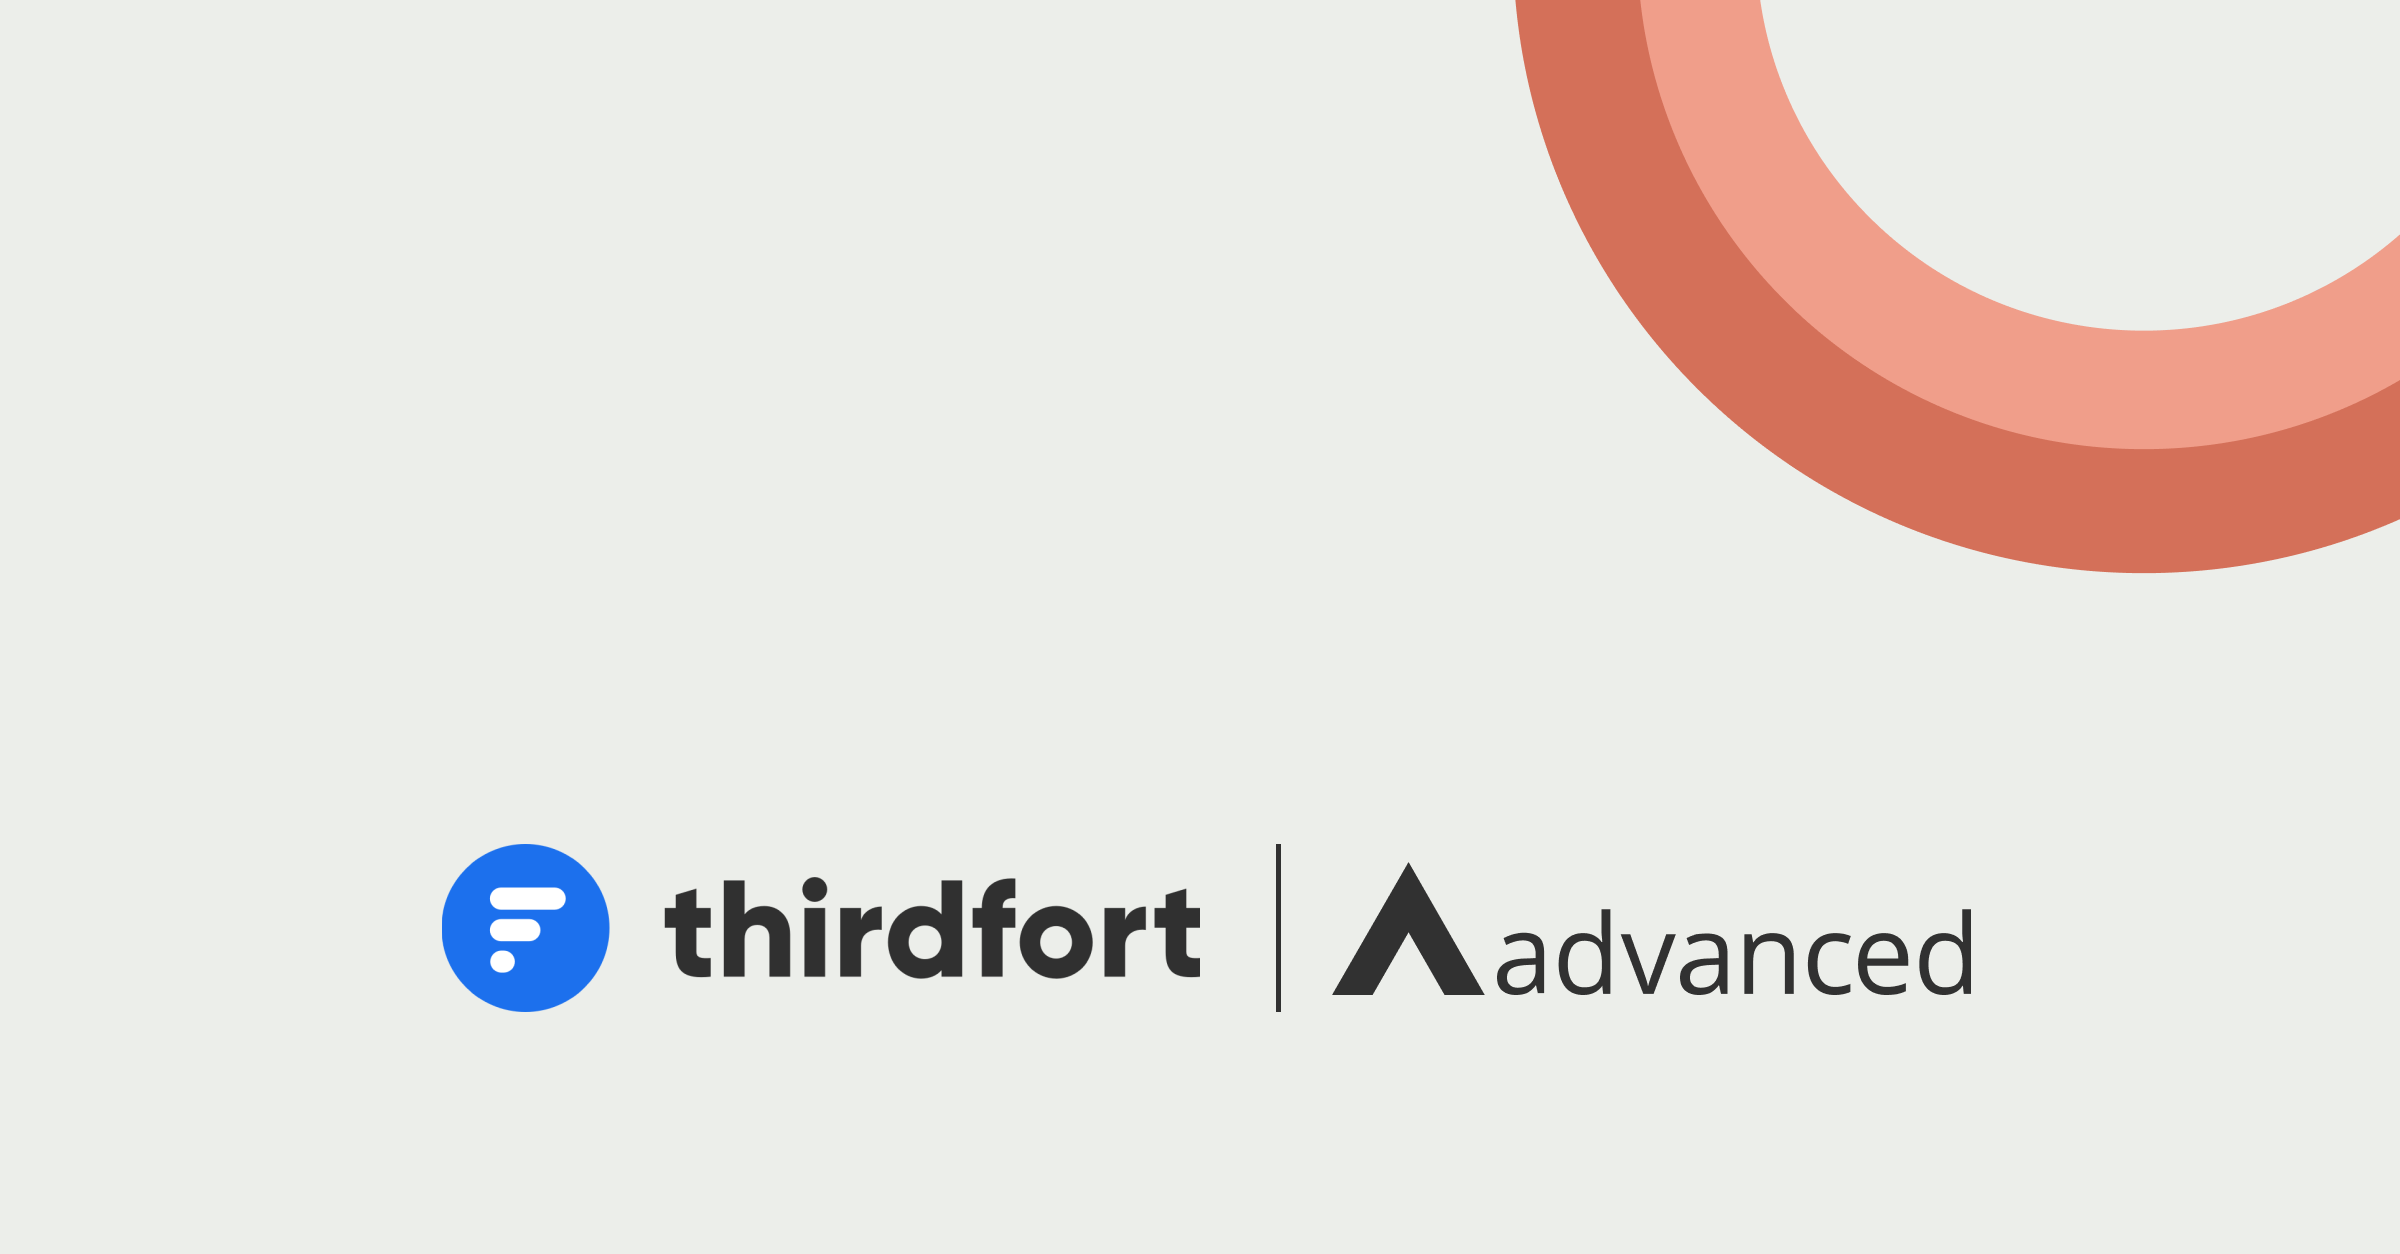 Thirdfort logo and Advanced logo on grey background with a two toned peach semi-circle graphic in the corner